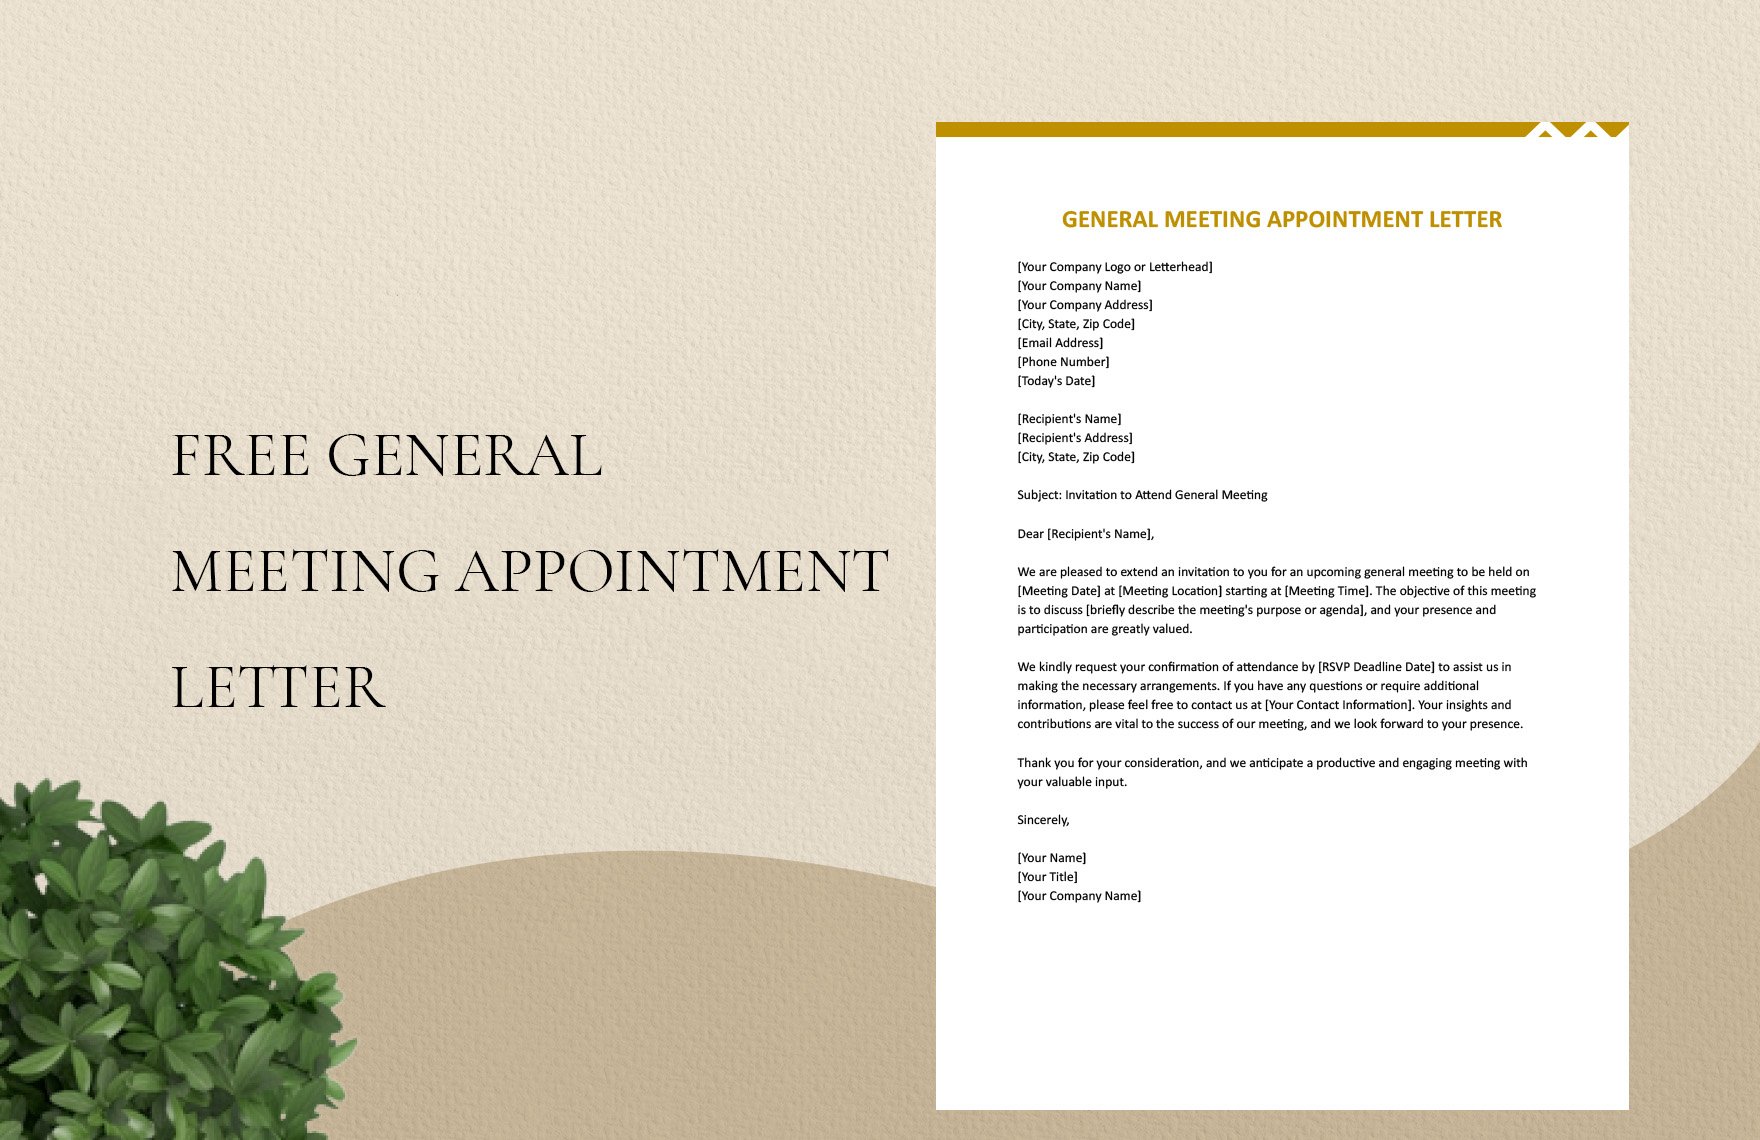 General Meeting Appointment Letter